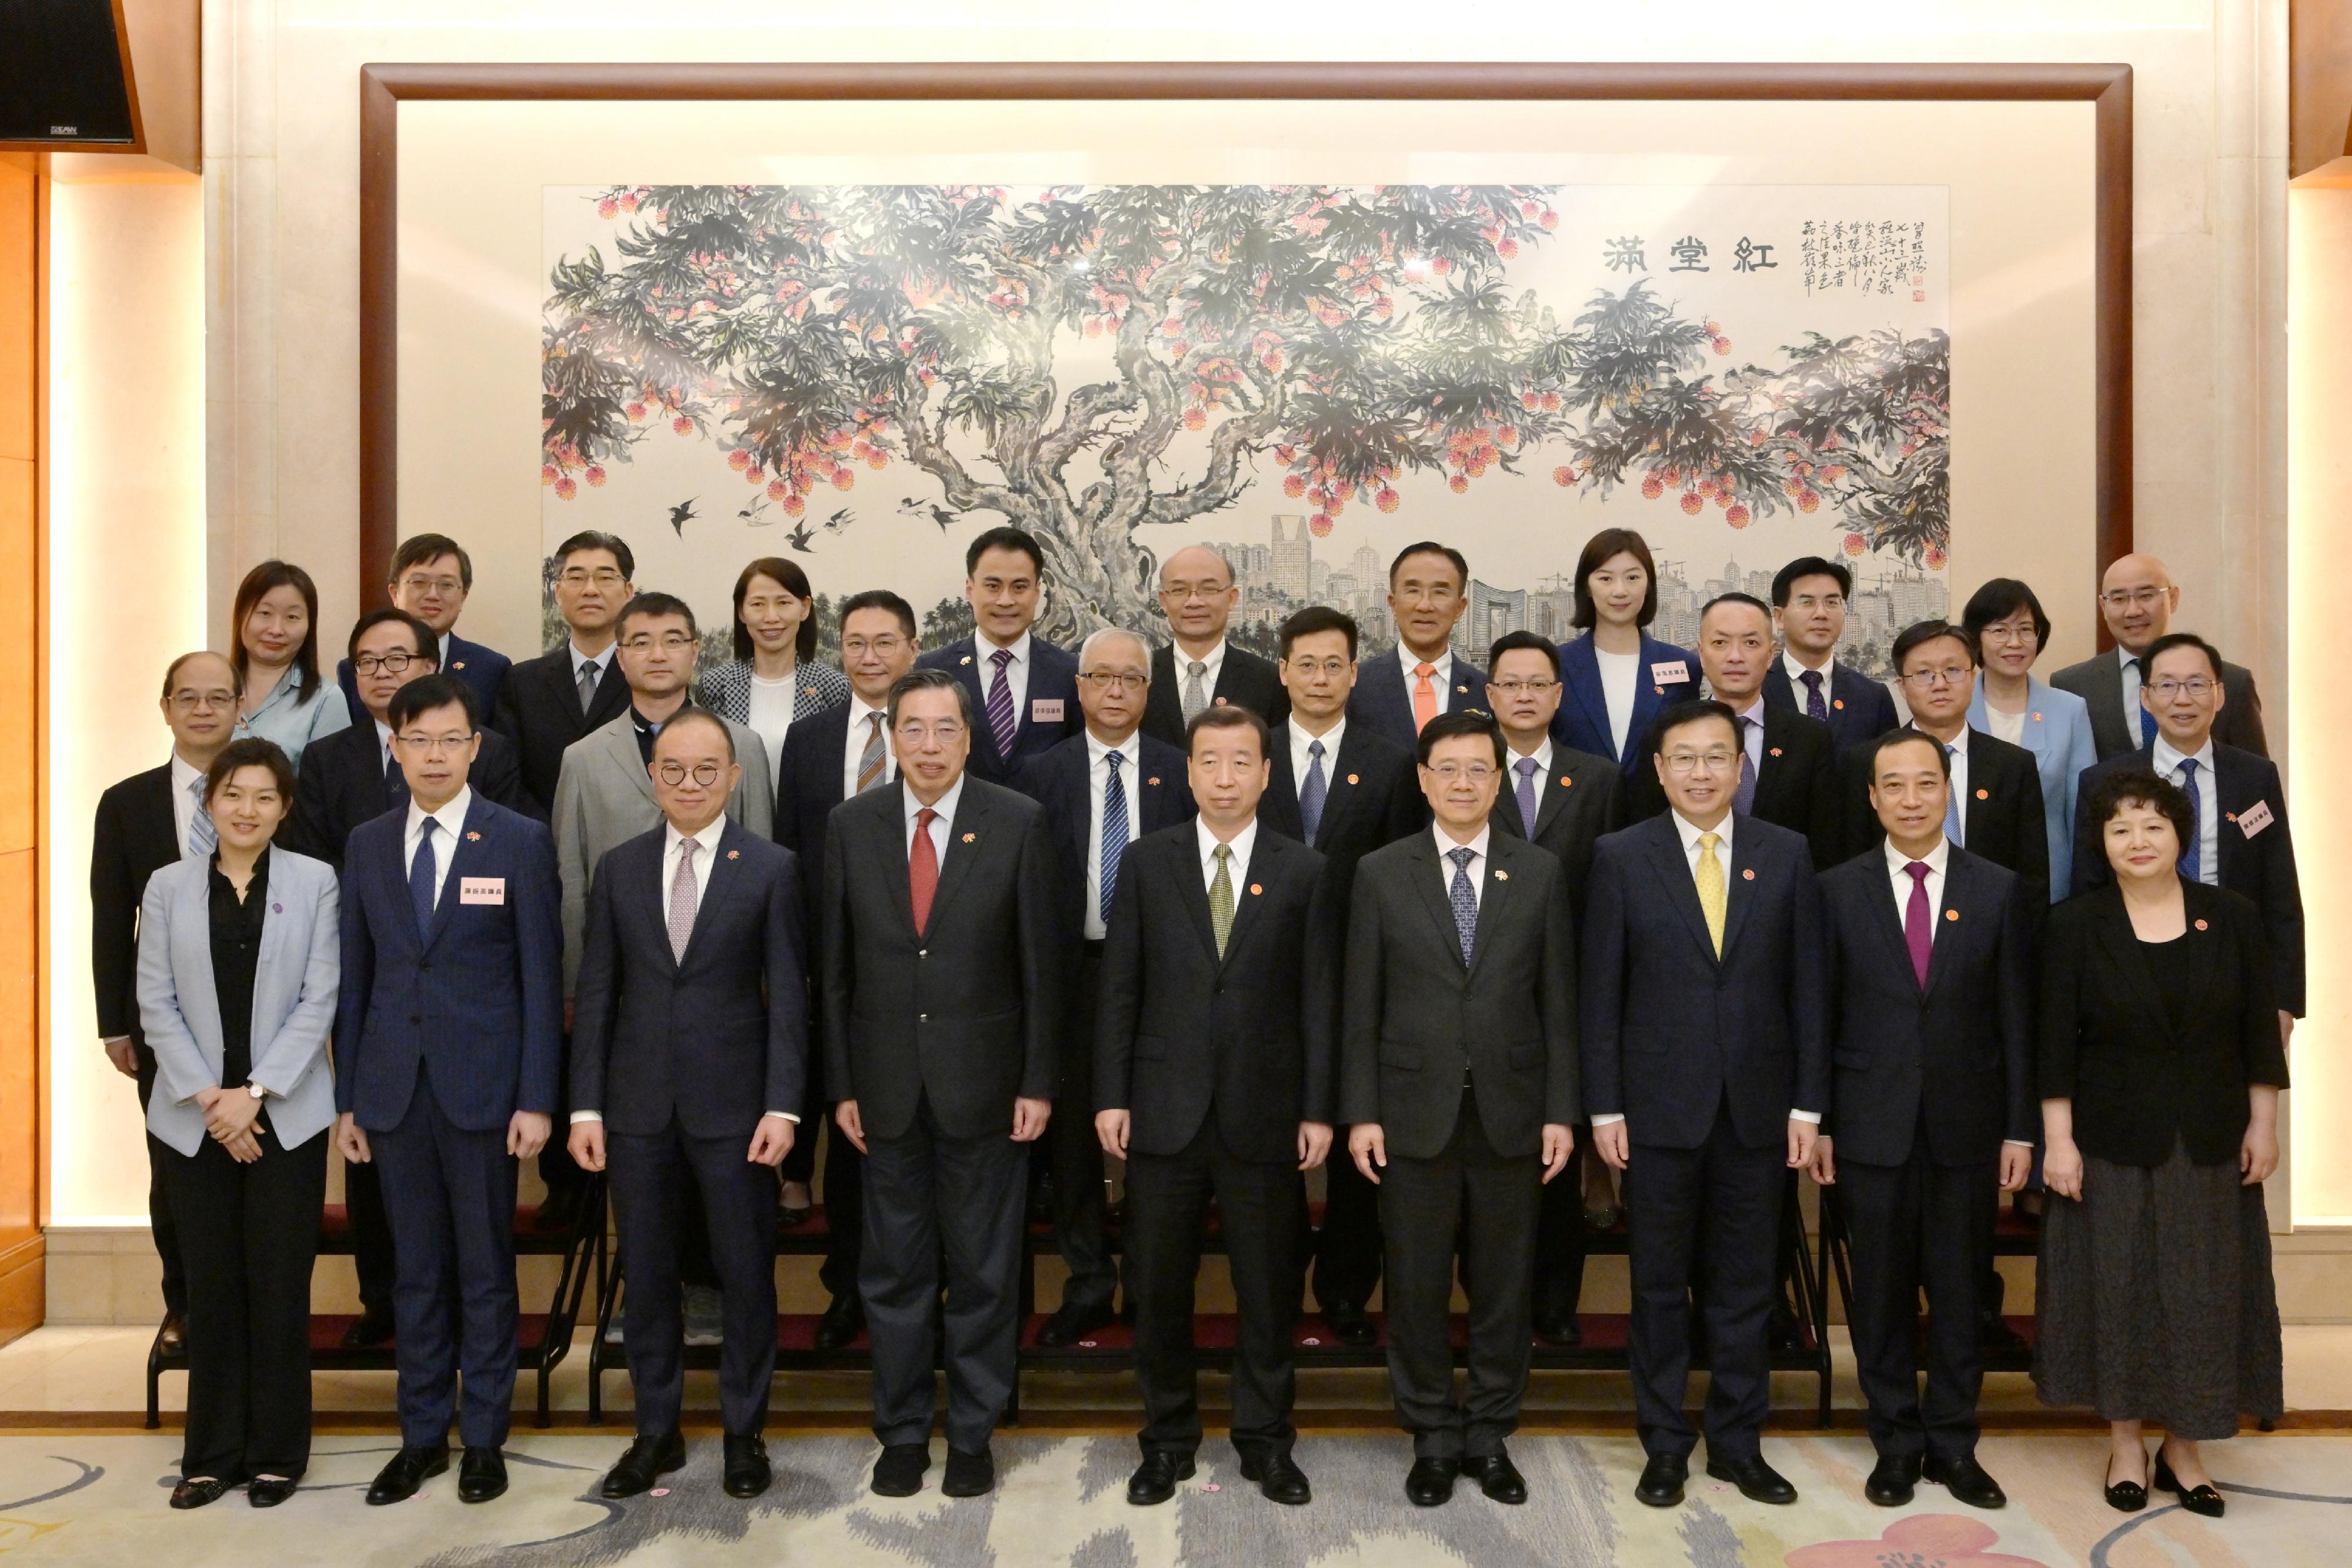 The Chief Executive, Mr John Lee, led a delegation of the Hong Kong Special Administrative Region Government and the Legislative Council to visit Dongguan today (April 22). Photo shows Mr Lee (front row, fourth right) meeting the Secretary of the CPC Dongguan Municipal Committee, Mr Xiao Yafei (front row, fifth right); the Mayor of the Dongguan Municipal Government, Mr Lyu Chengxi (front row, second right); the Deputy Director of the  Liaison Office of the Central People's Government in the Hong Kong Special Administrative Region, Mr He Jing (front row, third right); the Director General of the Hong Kong and Macao Affairs Office of the People's Government of Guangdong Province, Ms Li Huanchun (front row, first right); and the members of the delegation before the dinner with leaders of Dongguan Municipal Government.